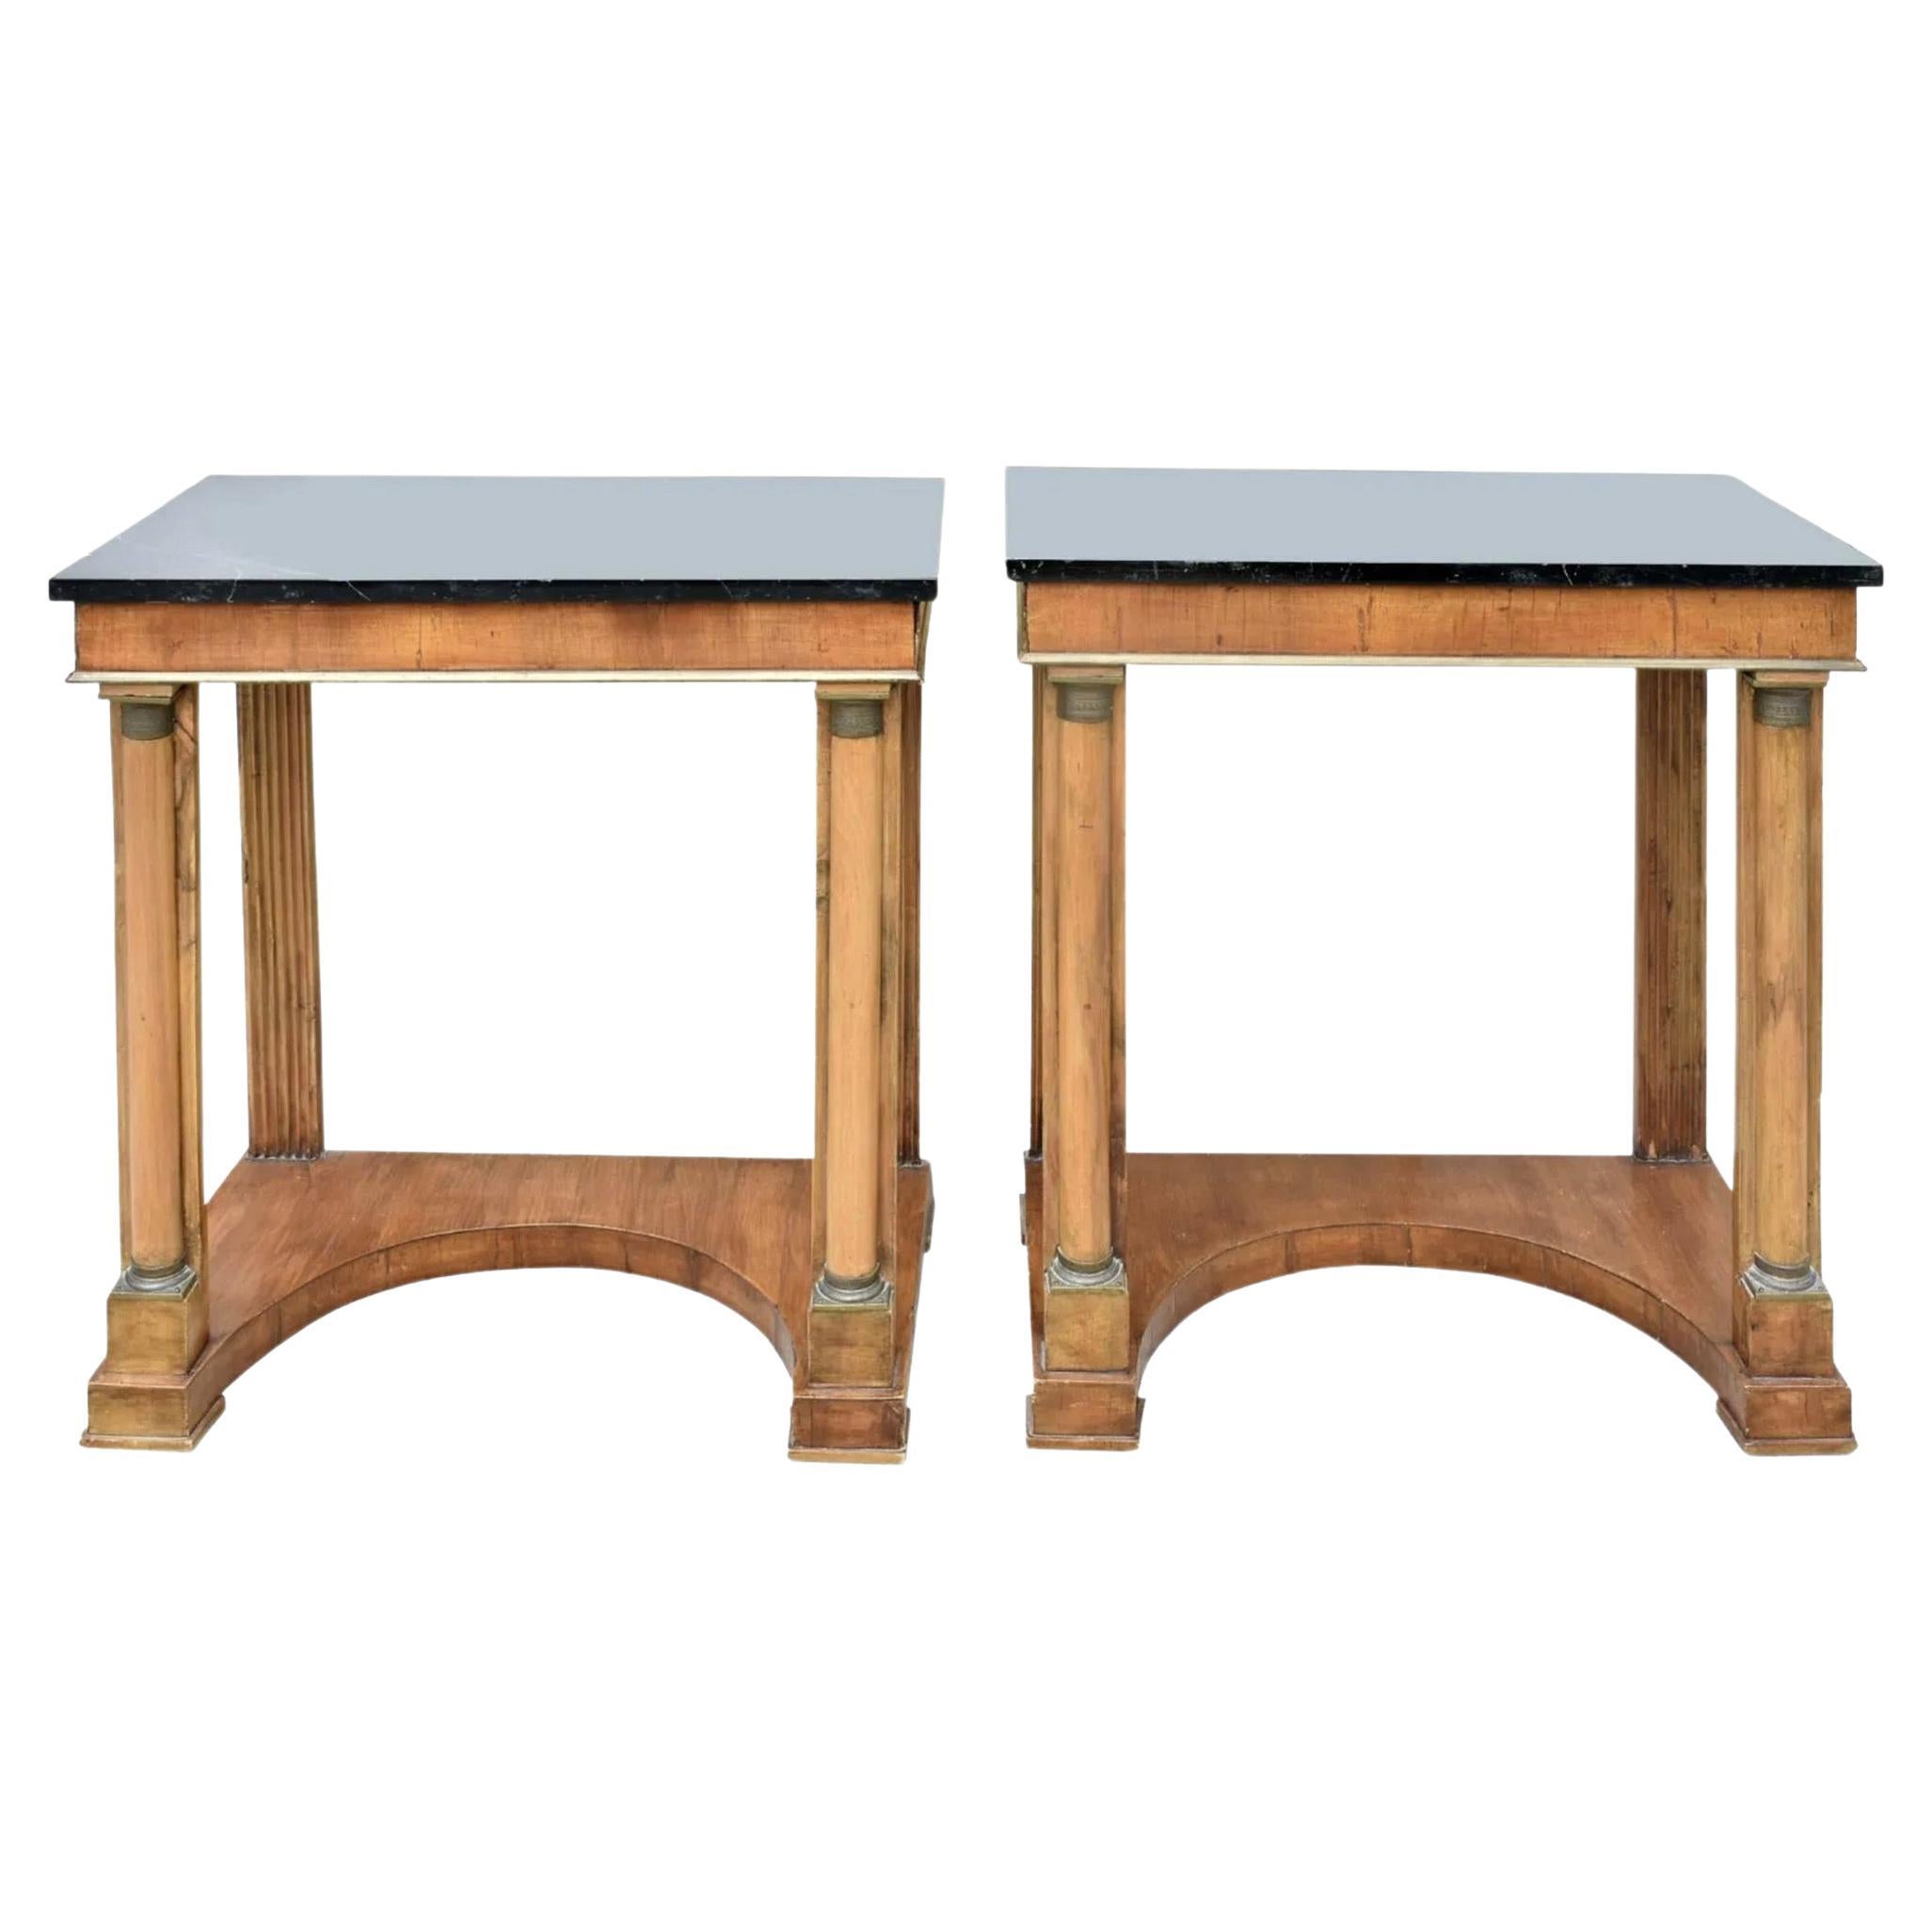 Pair of Mid 19th Century Antique French Empire Tables For Sale